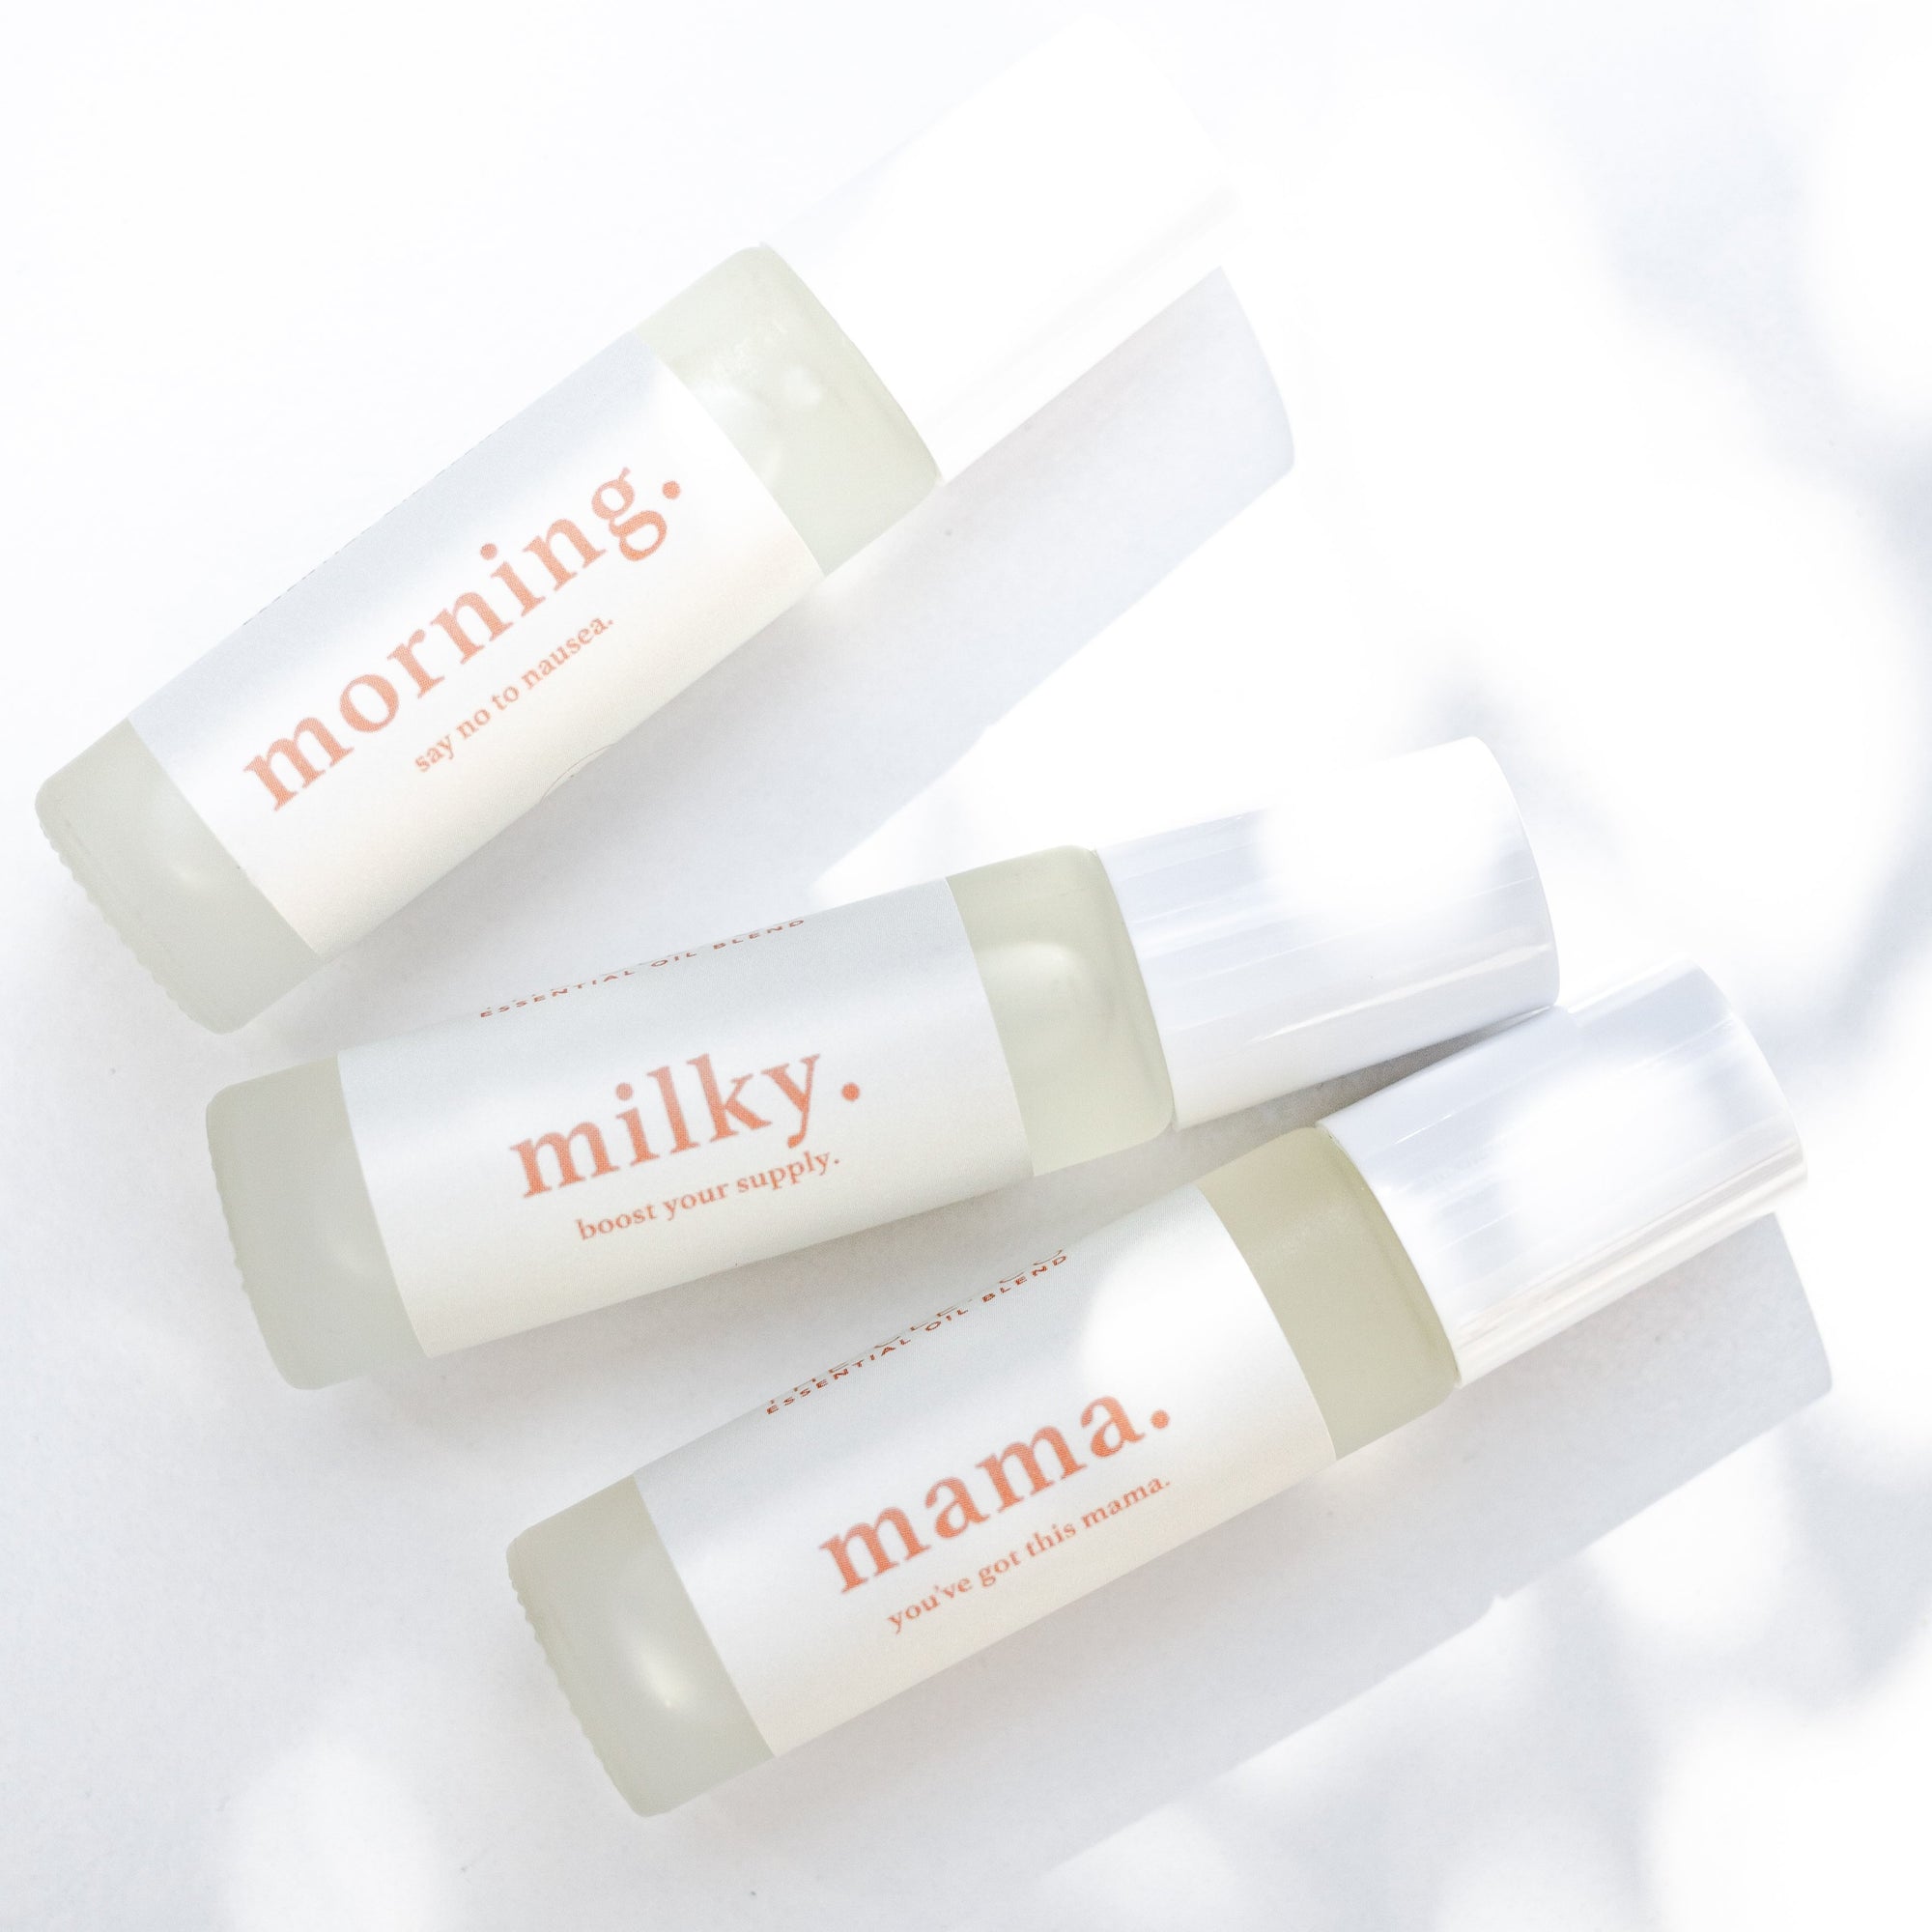 The Mama Essential Oil Blends bundle includes Mama, Morning and Milky blends.